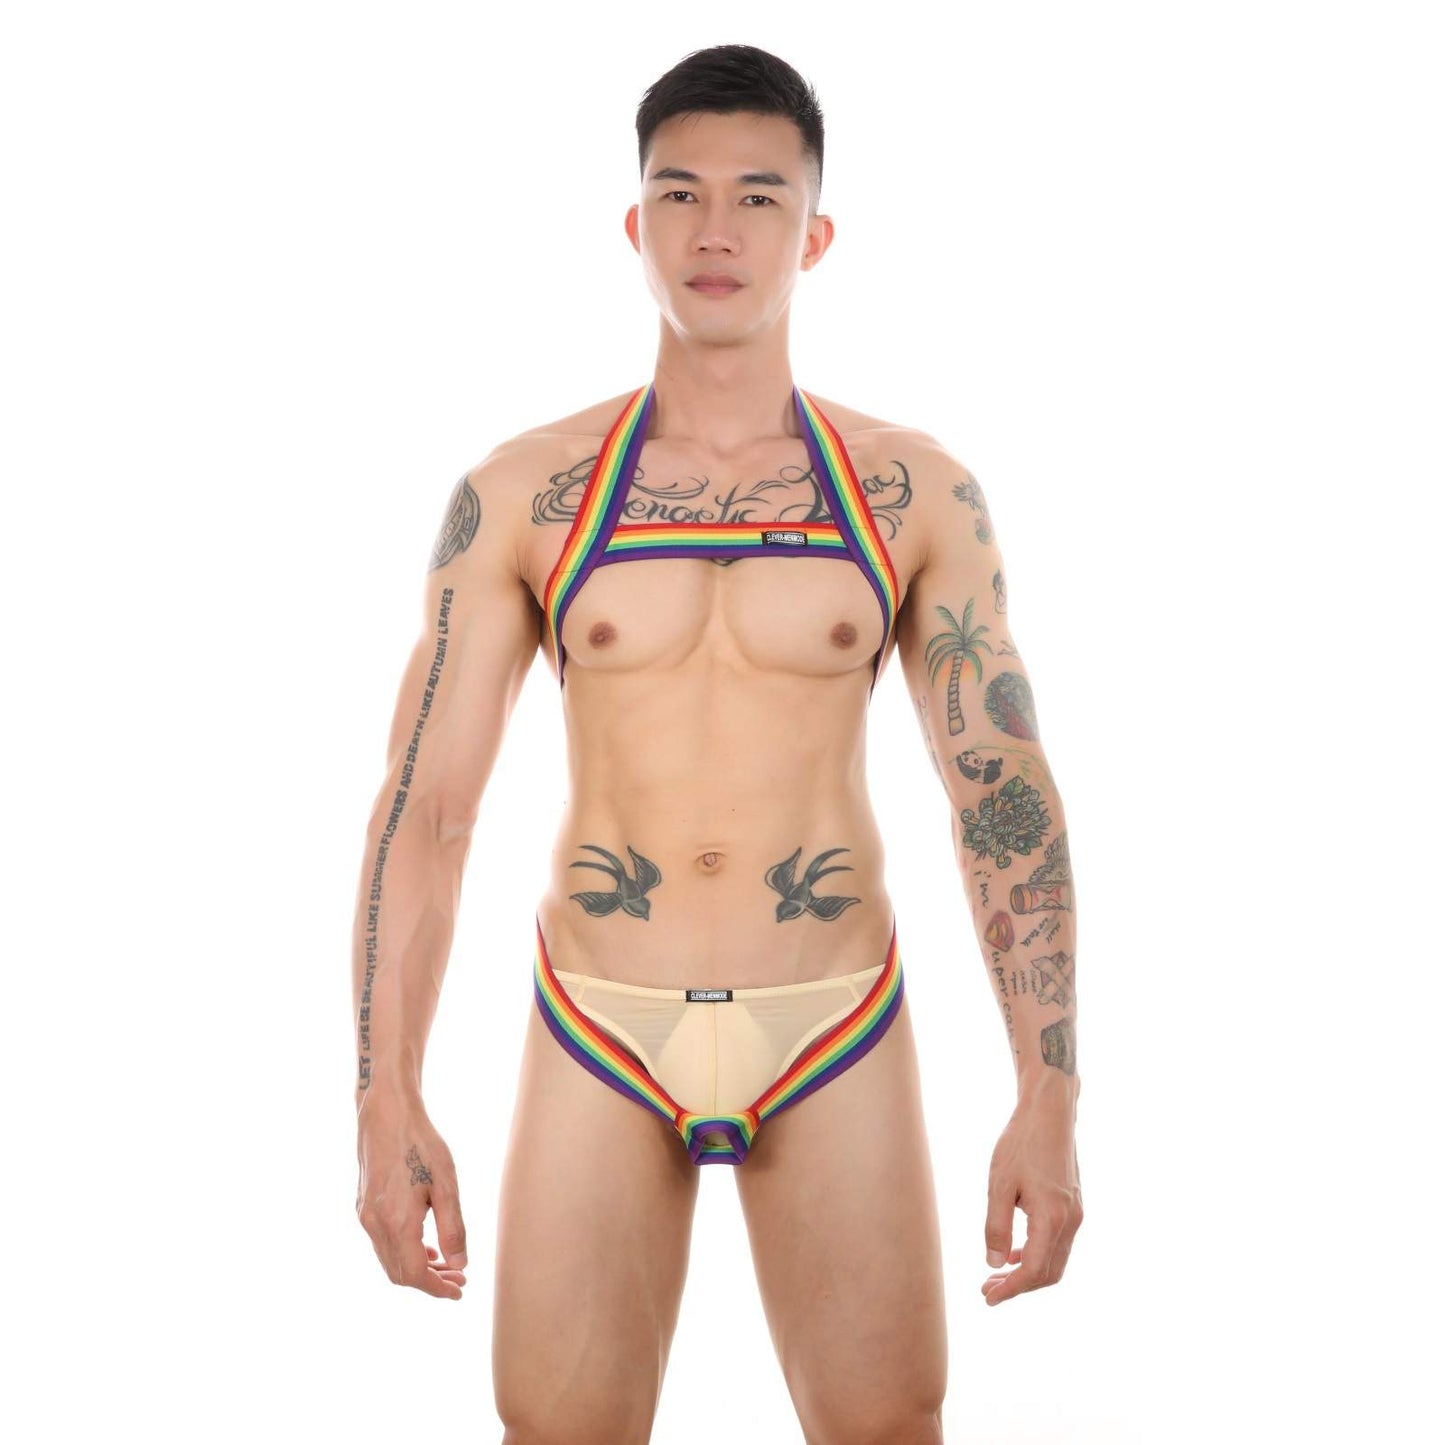 Harness, waistband and penis ring in pride color.